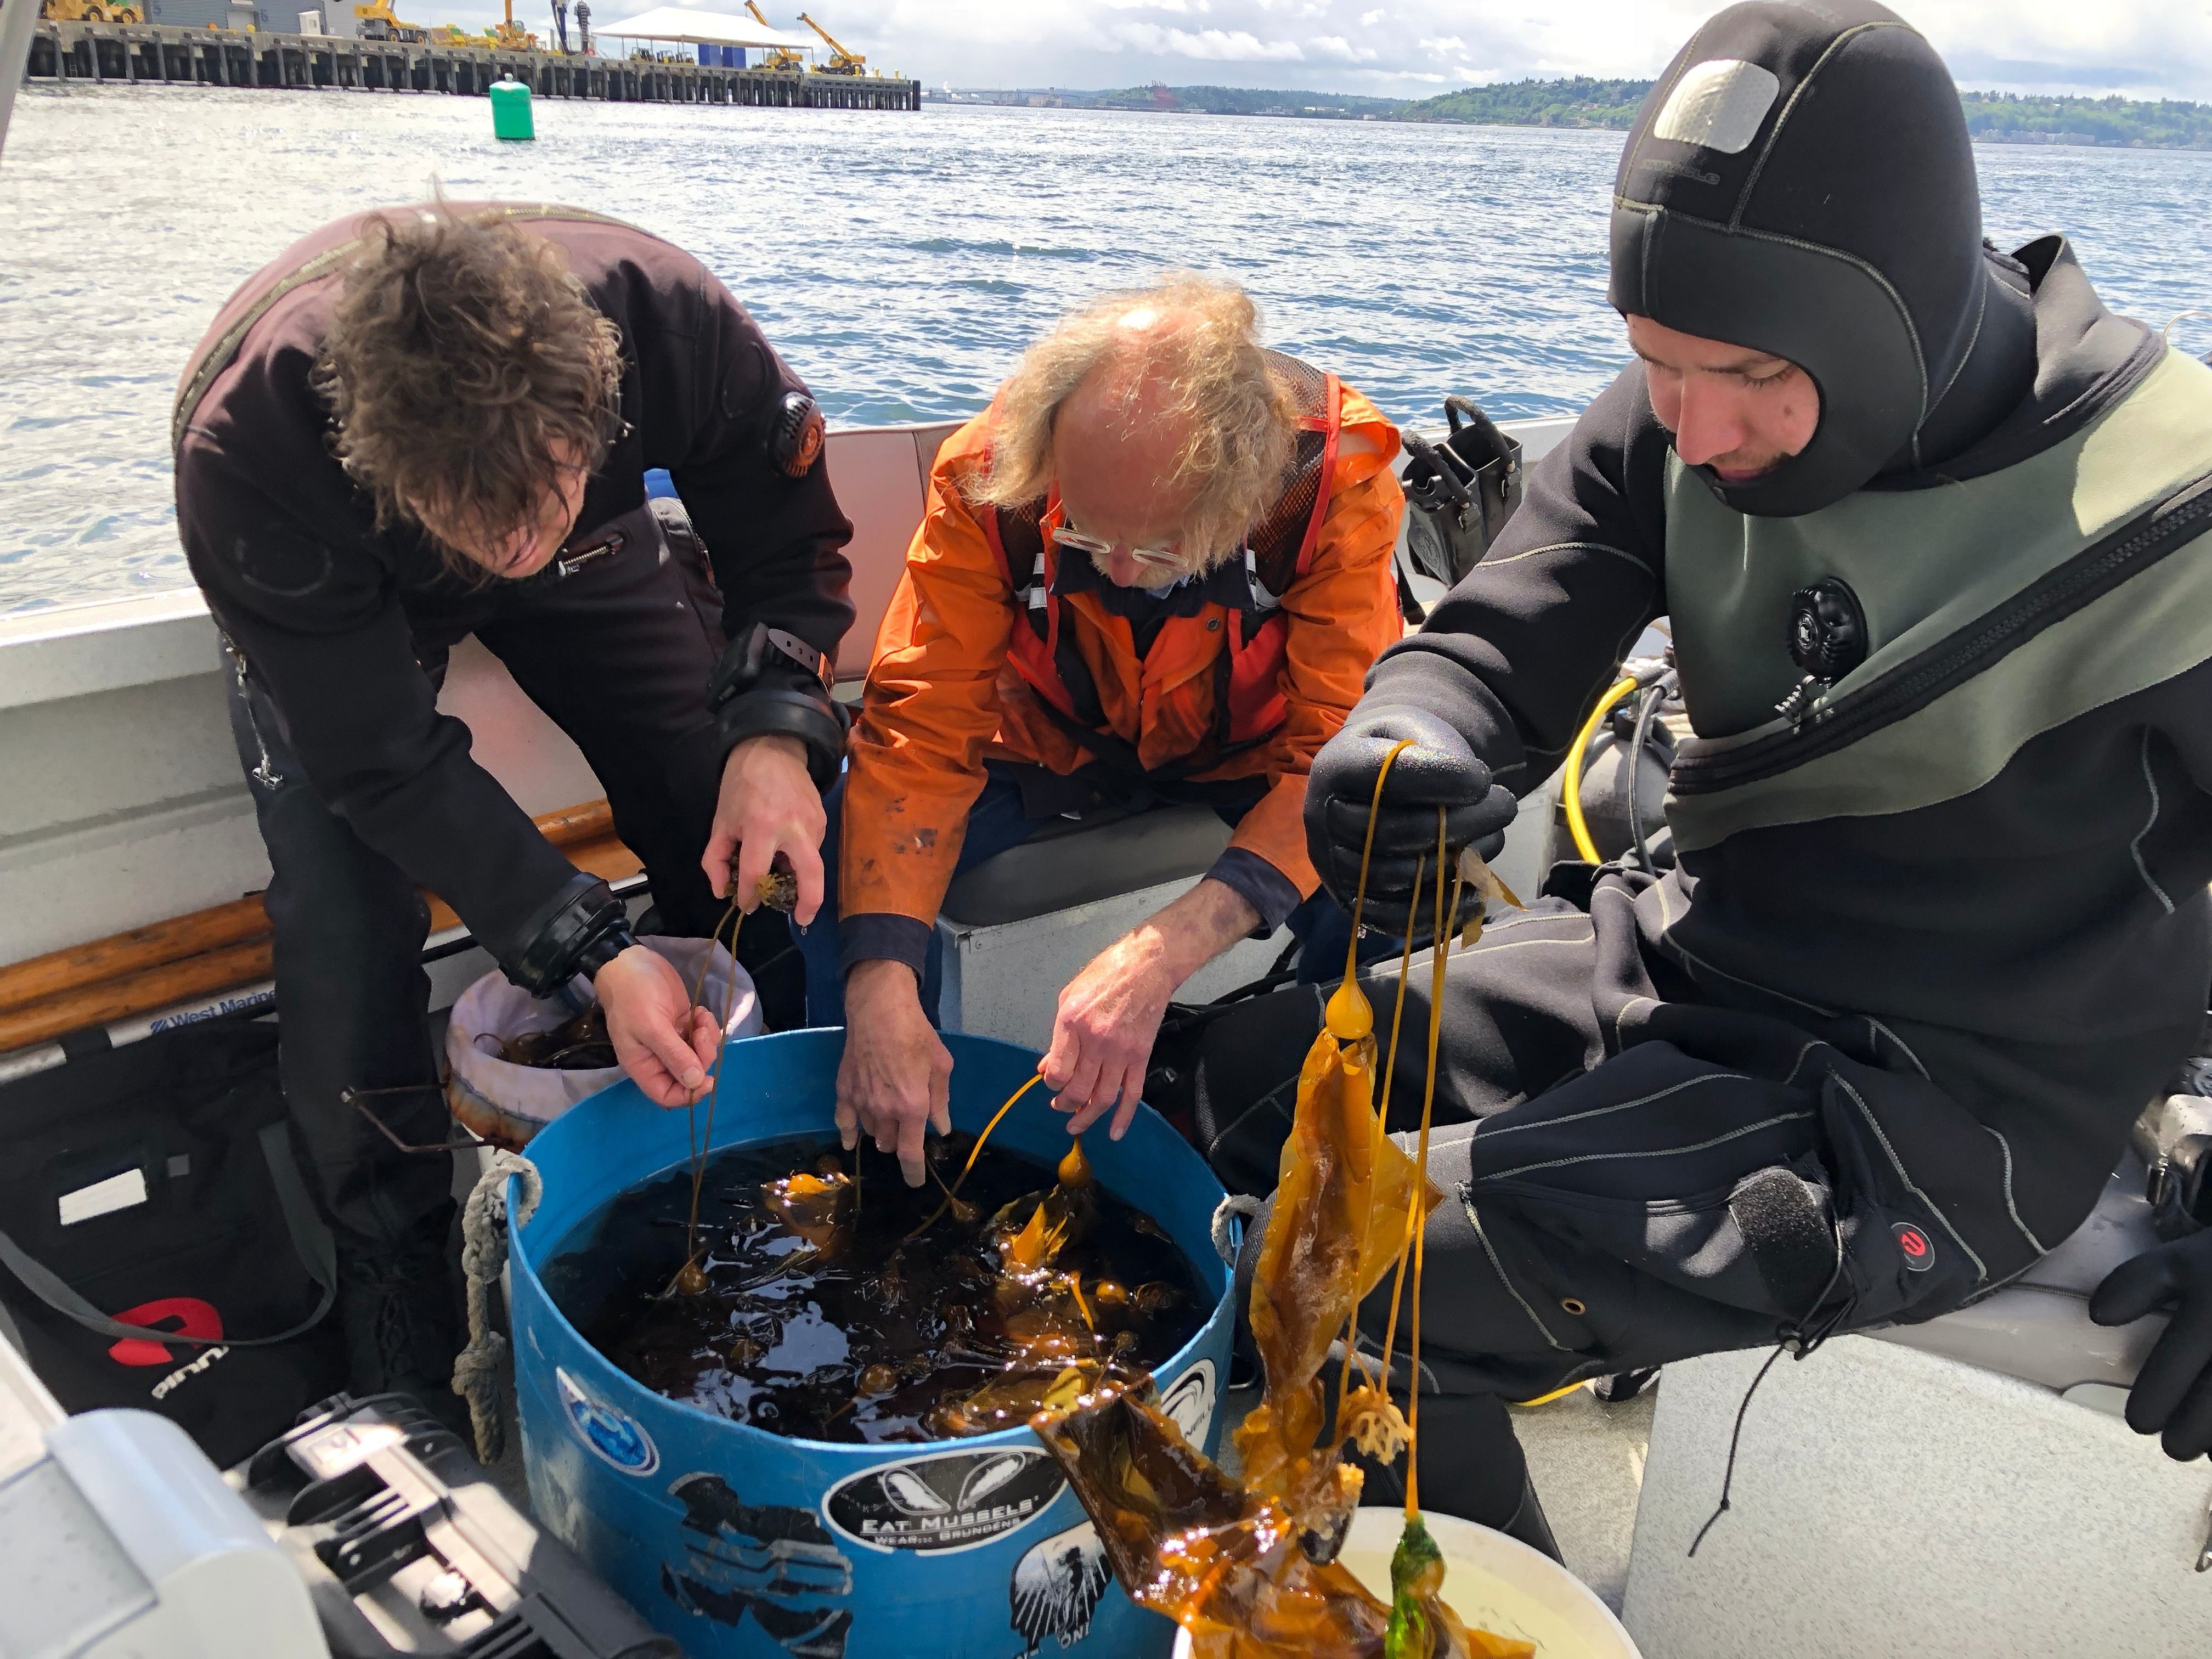 Scientists look at kelp in a boat